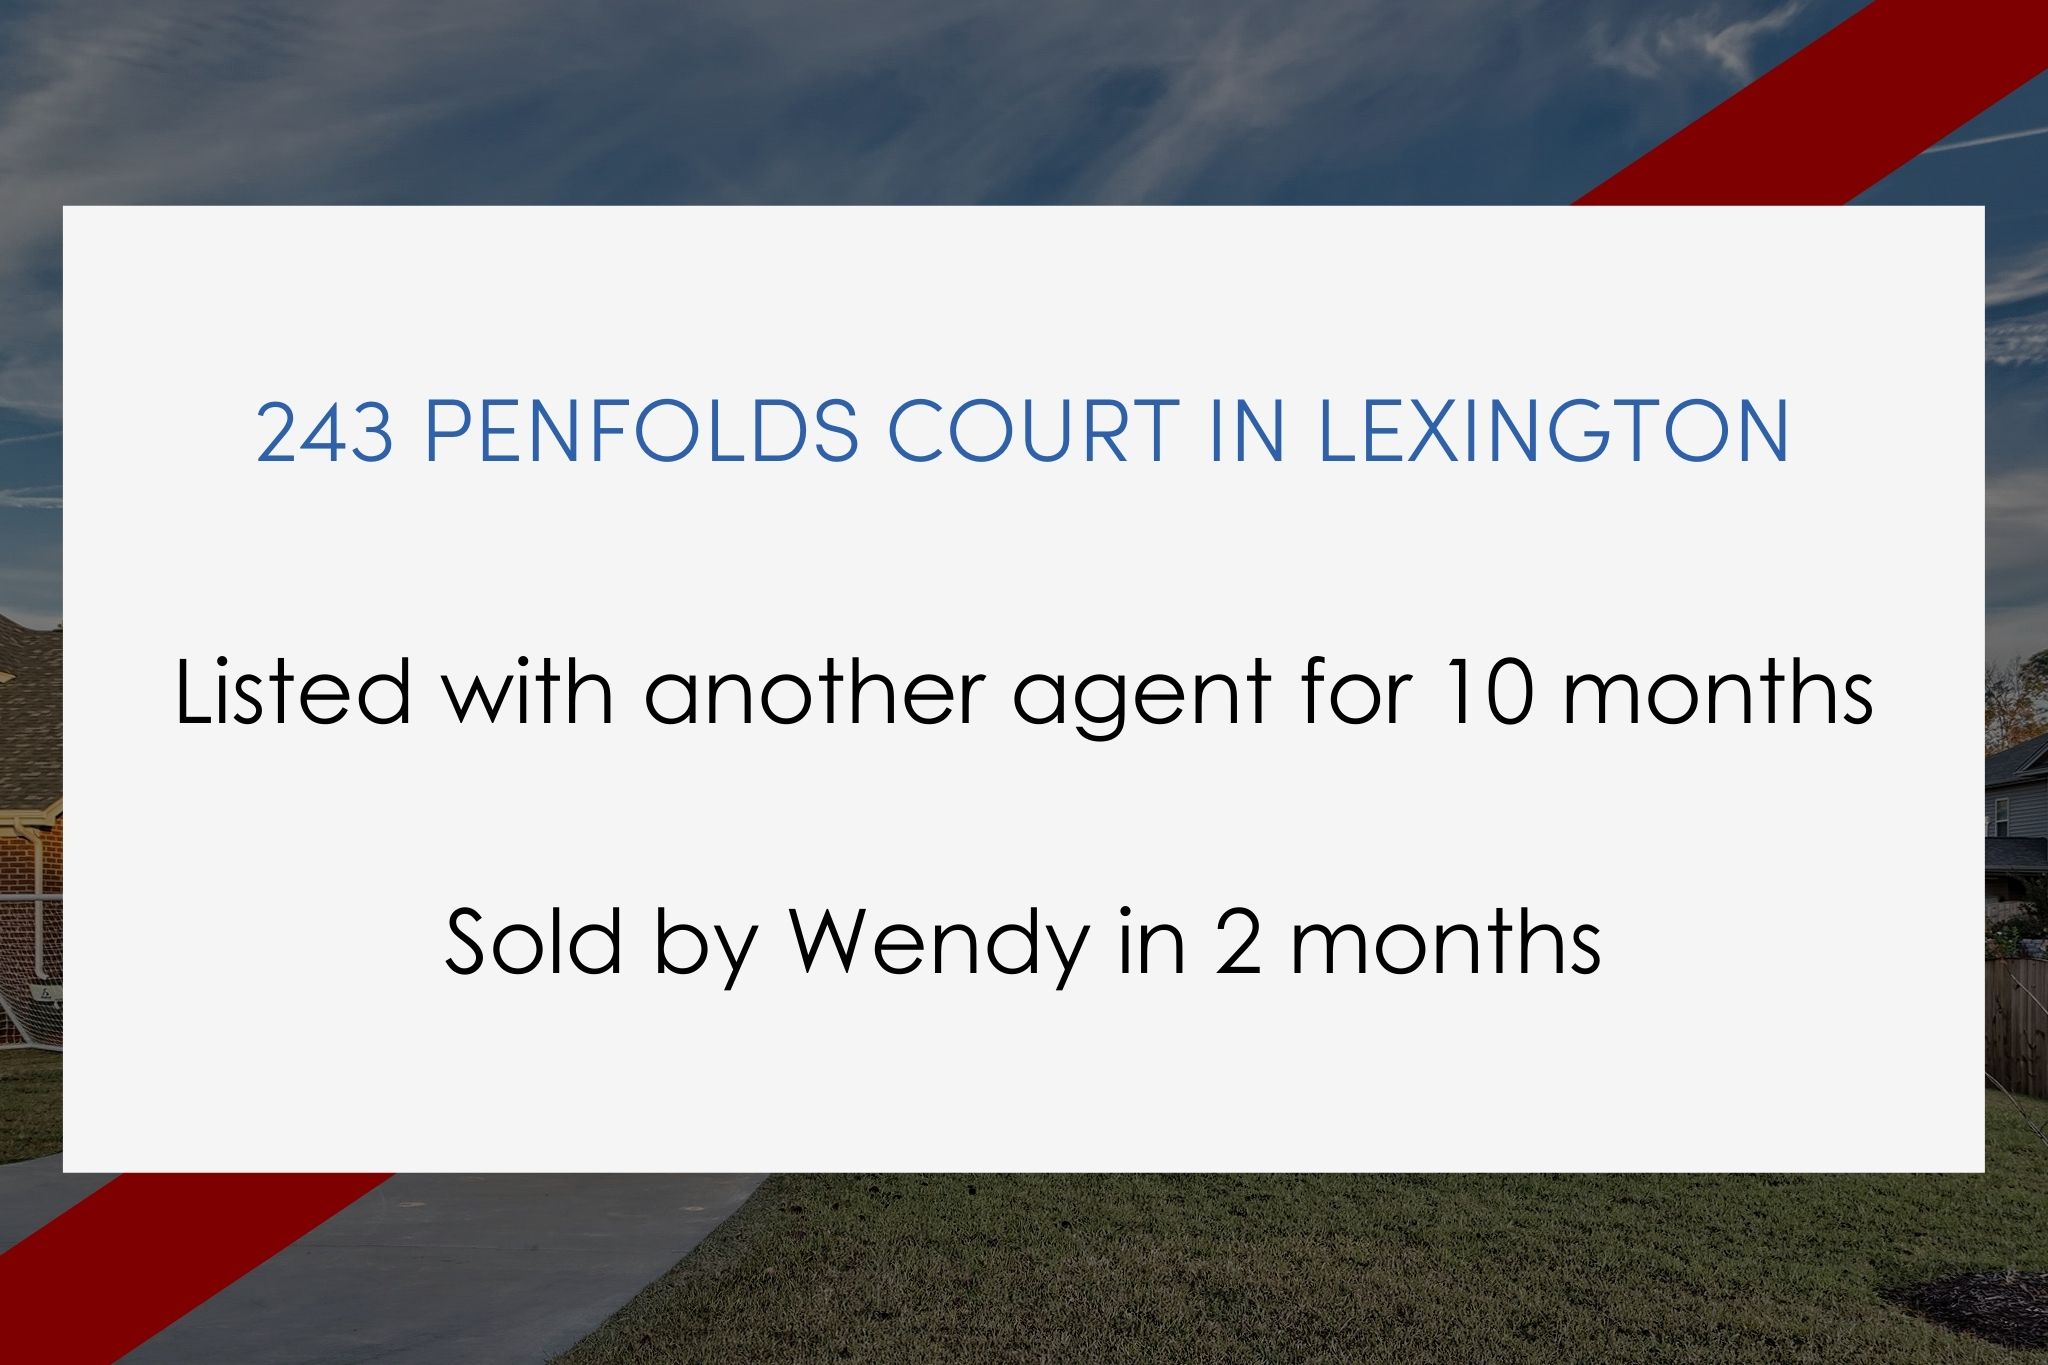 Listed with another agent for 10 months. Sold by Wendy in 2 months.